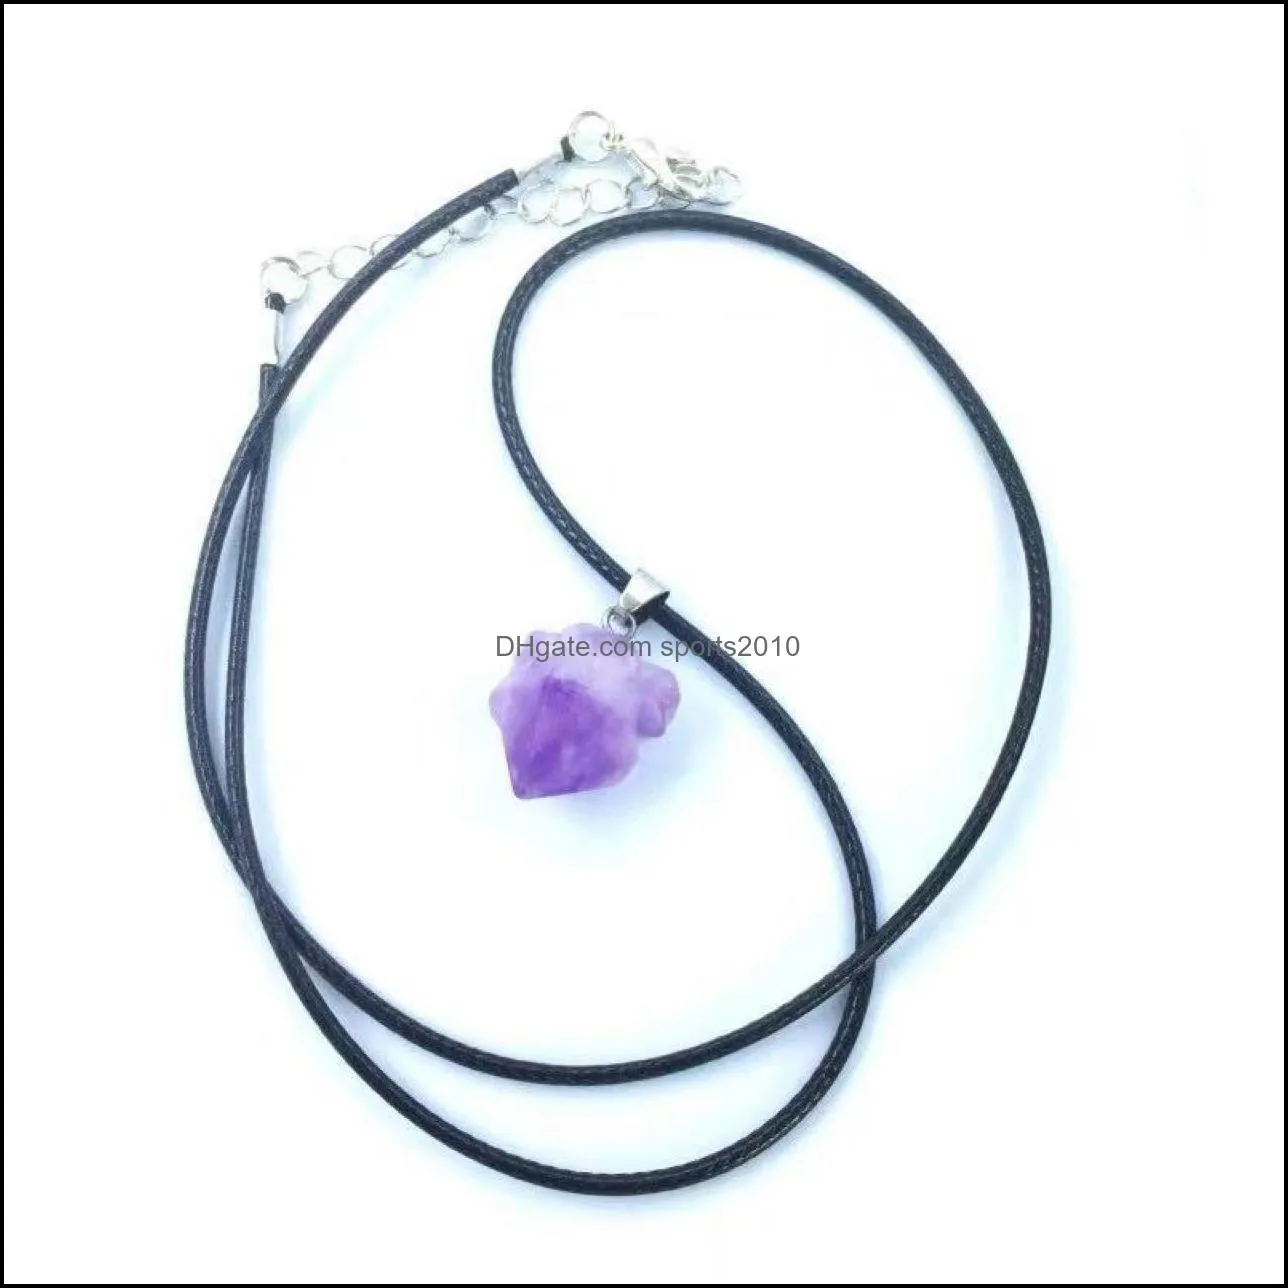 bulk natural crystal stone charms amethyst irregular shape pendants for necklace earrings jewelry makin sports2010